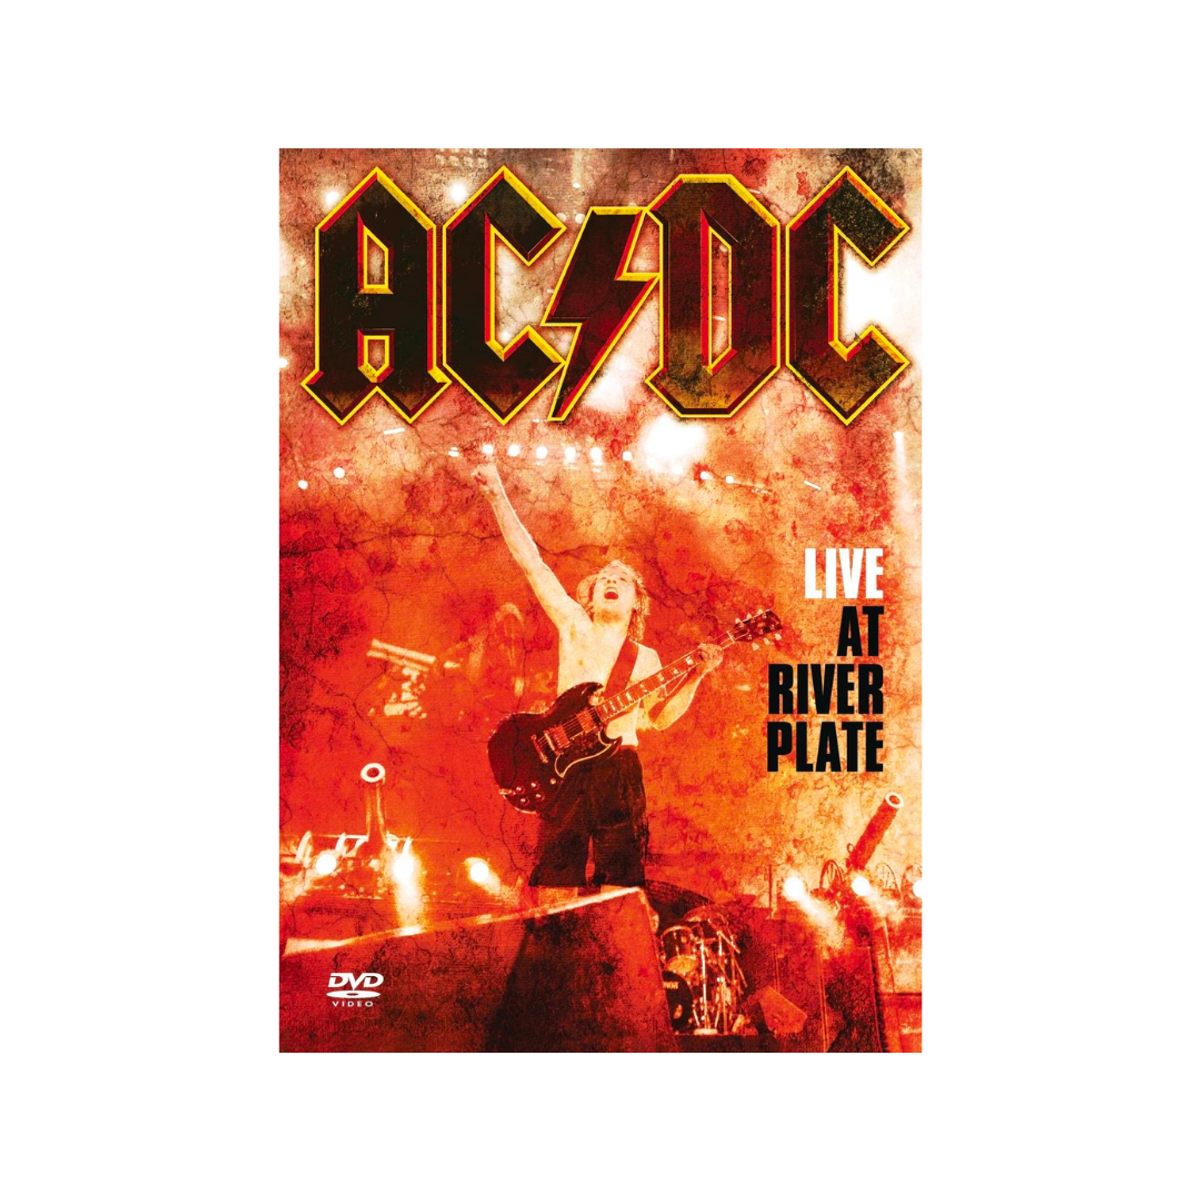 AC/DC - BLU-RAY Plate At AC/DC River Live